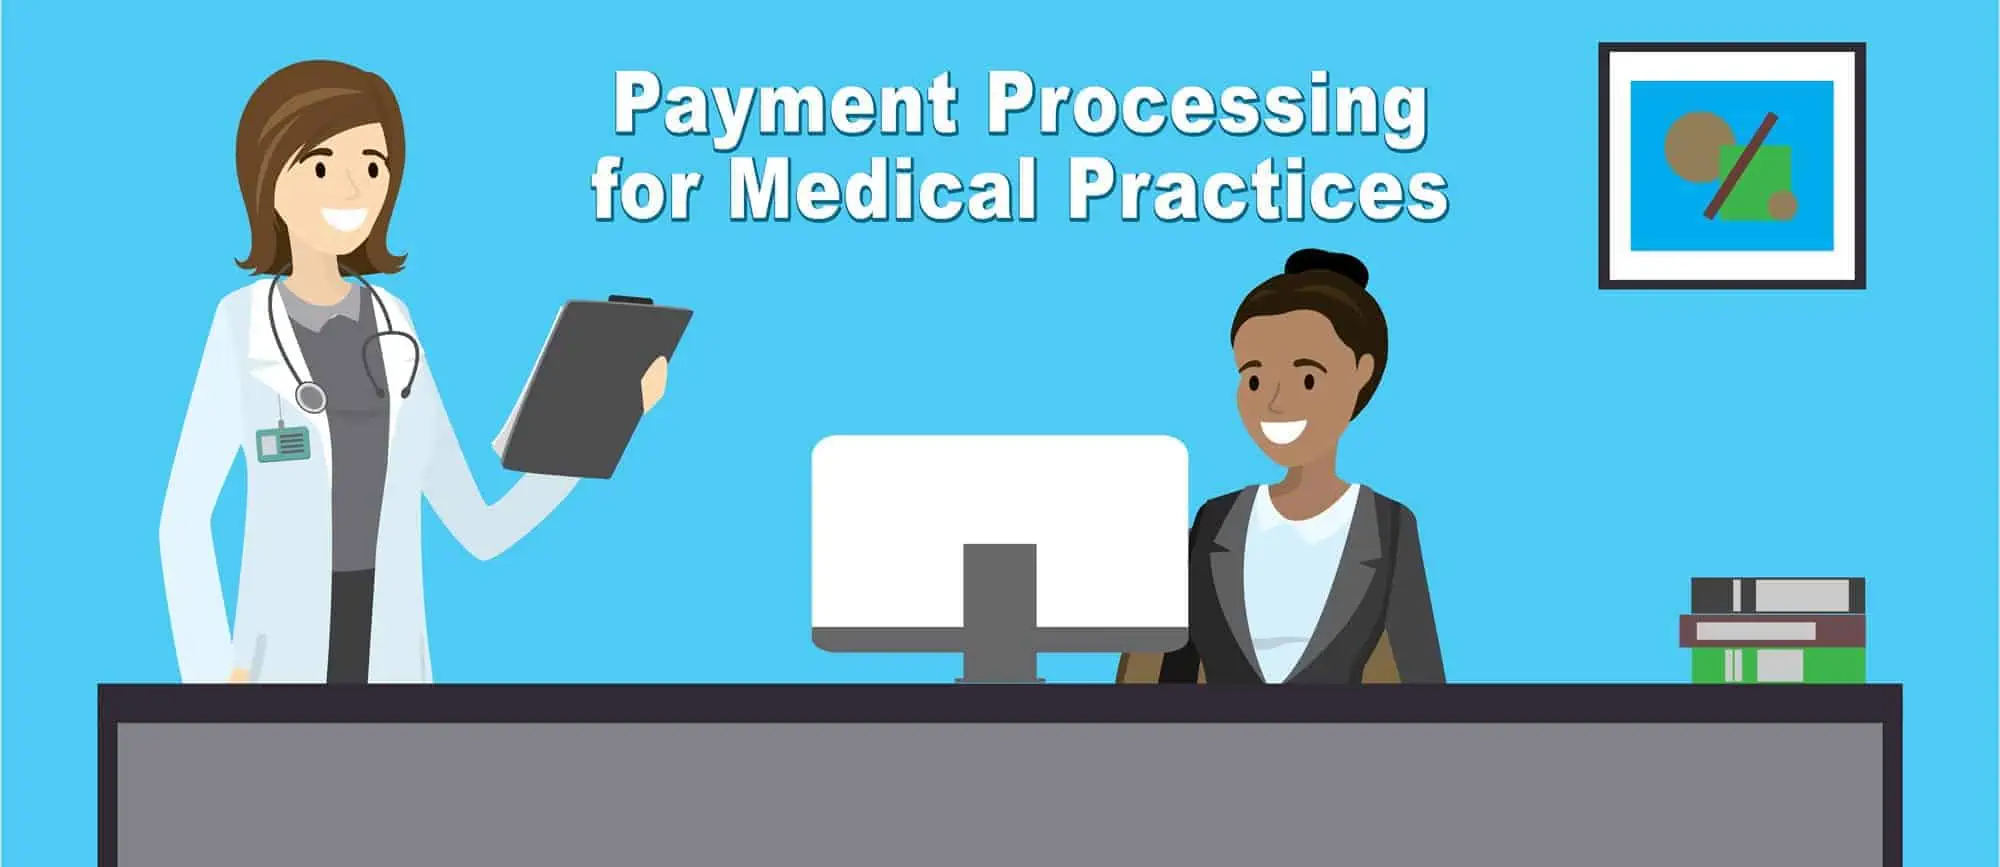 Payment Processing for Medical Practices